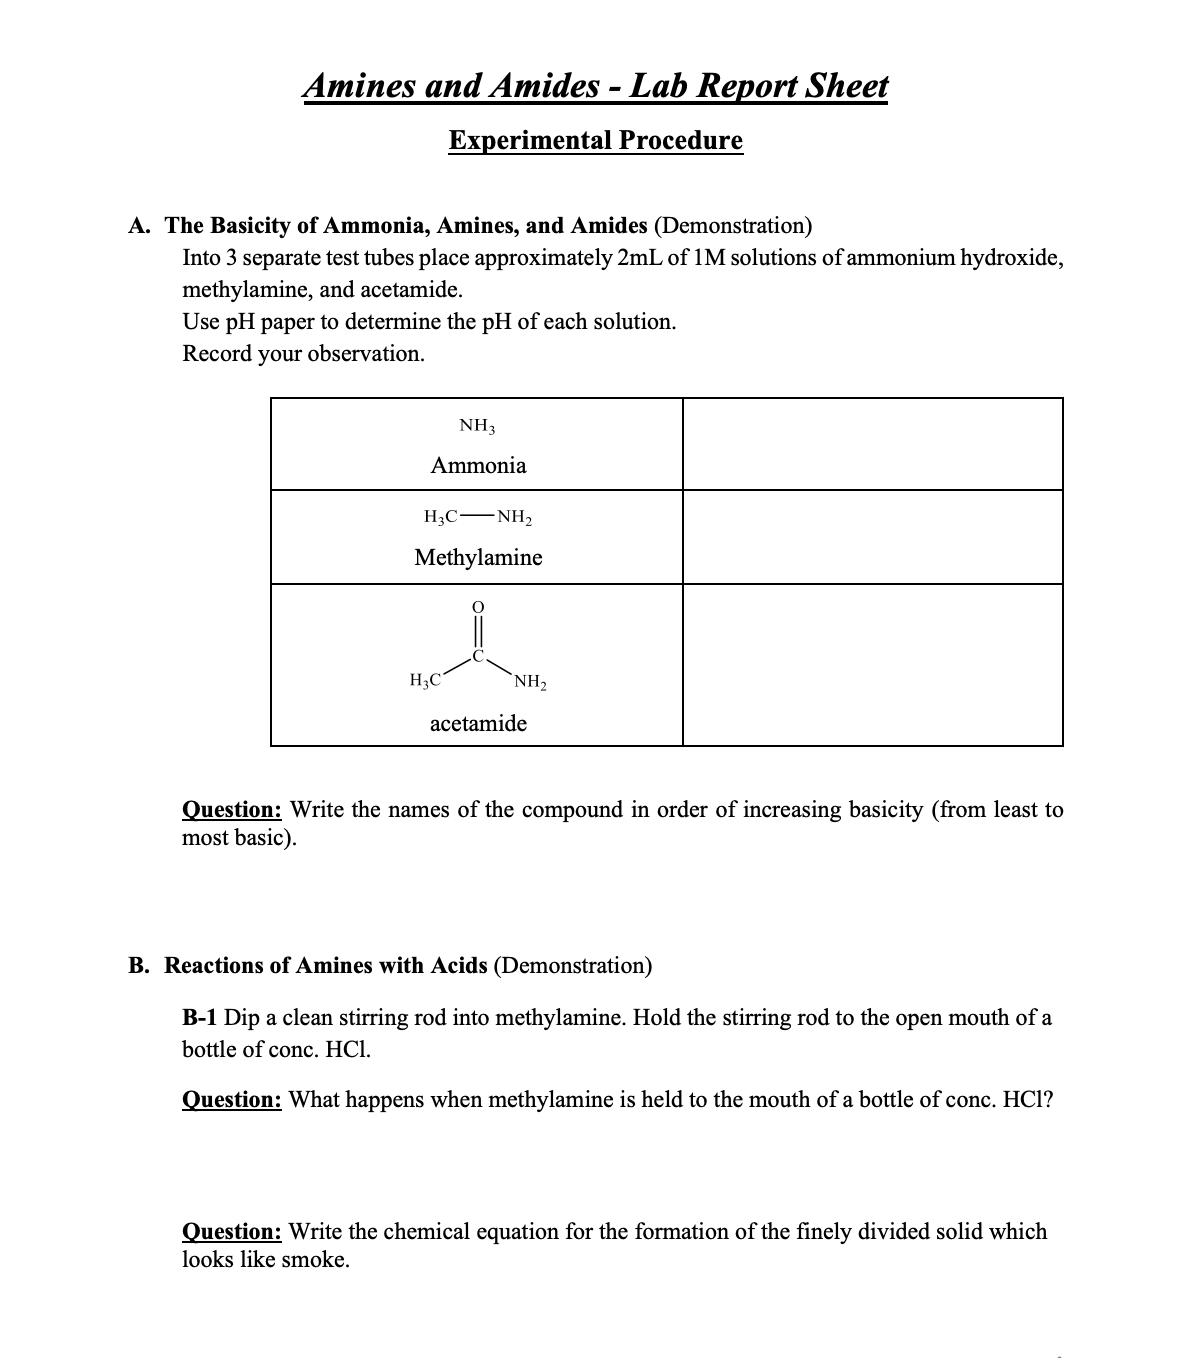 Amines and Amides - Lab Report Sheet
Experimental Procedure
A. The Basicity of Ammonia, Amines, and Amides (Demonstration)
Into 3 separate test tubes place approximately 2mL of 1M solutions of ammonium hydroxide,
methylamine, and acetamide.
Use pH paper to determine the pH of each solution.
Record your observation.
NH3
Ammonia
H3C -NH2
Methylamine
H3C
NH,
acetamide
Question: Write the names of the compound in order of increasing basicity (from least to
most basic).
B. Reactions of Amines with Acids (Demonstration)
B-1 Dip a clean stirring rod into methylamine. Hold the stirring rod to the open mouth of a
bottle of conc. HCl.
Question: What happens when methylamine is held to the mouth of a bottle of conc. HCl?
Question: Write the chemical equation for the formation of the finely divided solid which
looks like smoke.
